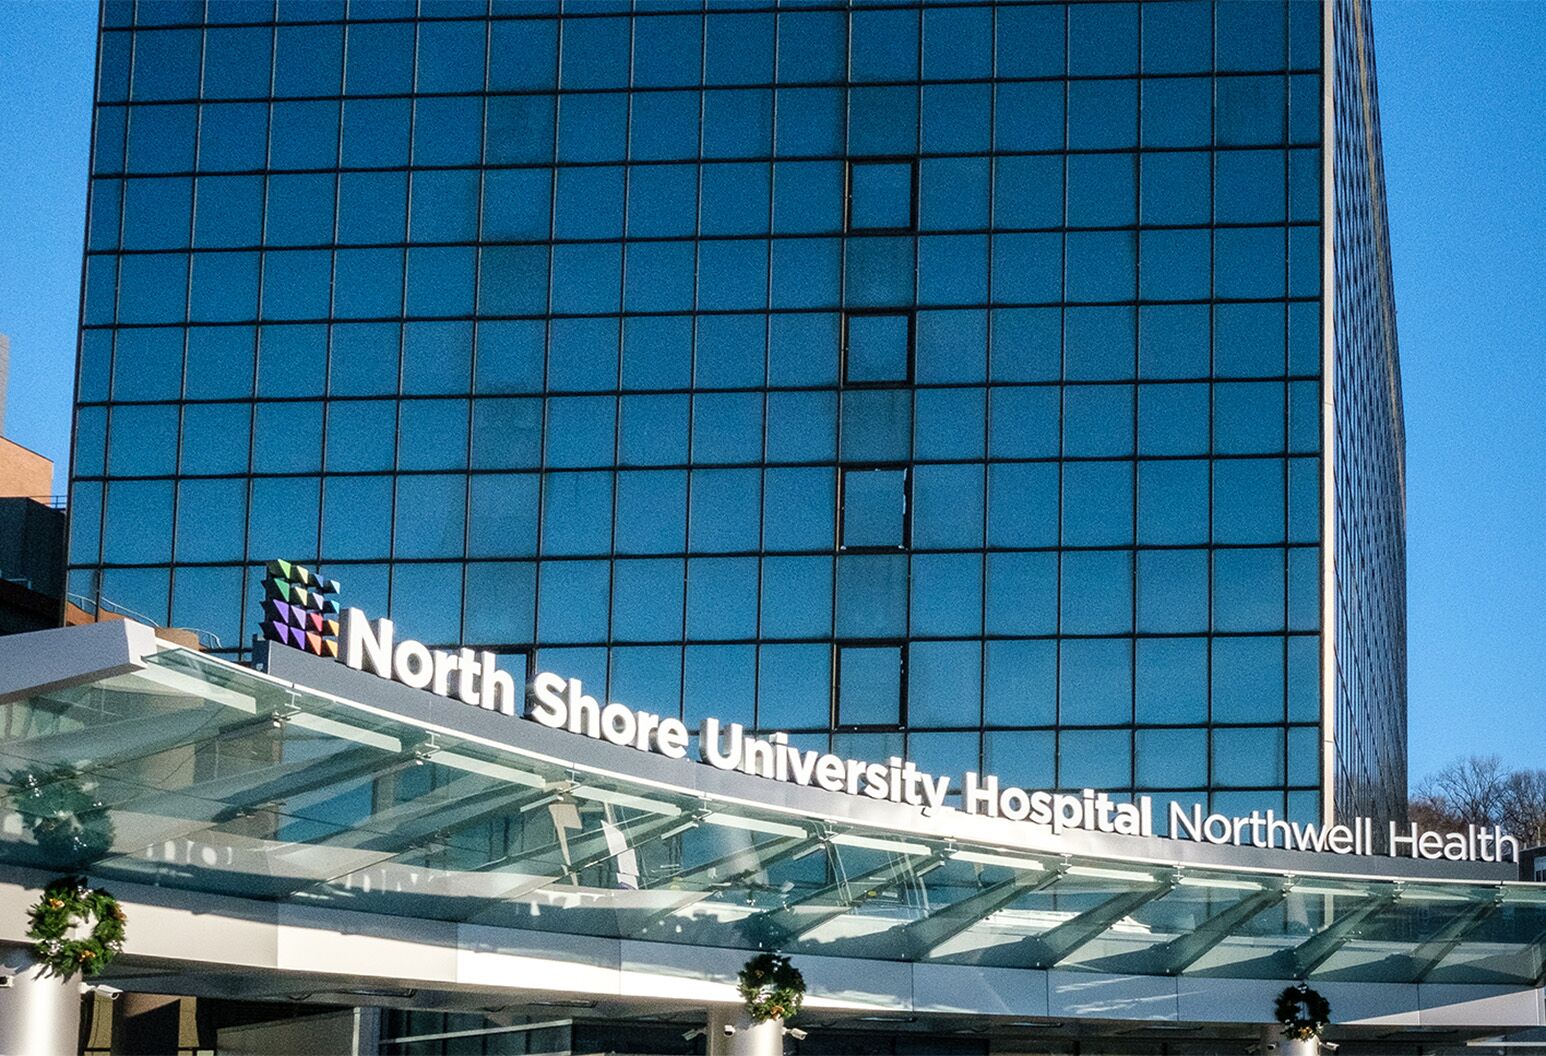 North Shore University Hospital Recognized For Patient Safety Northwell Health 